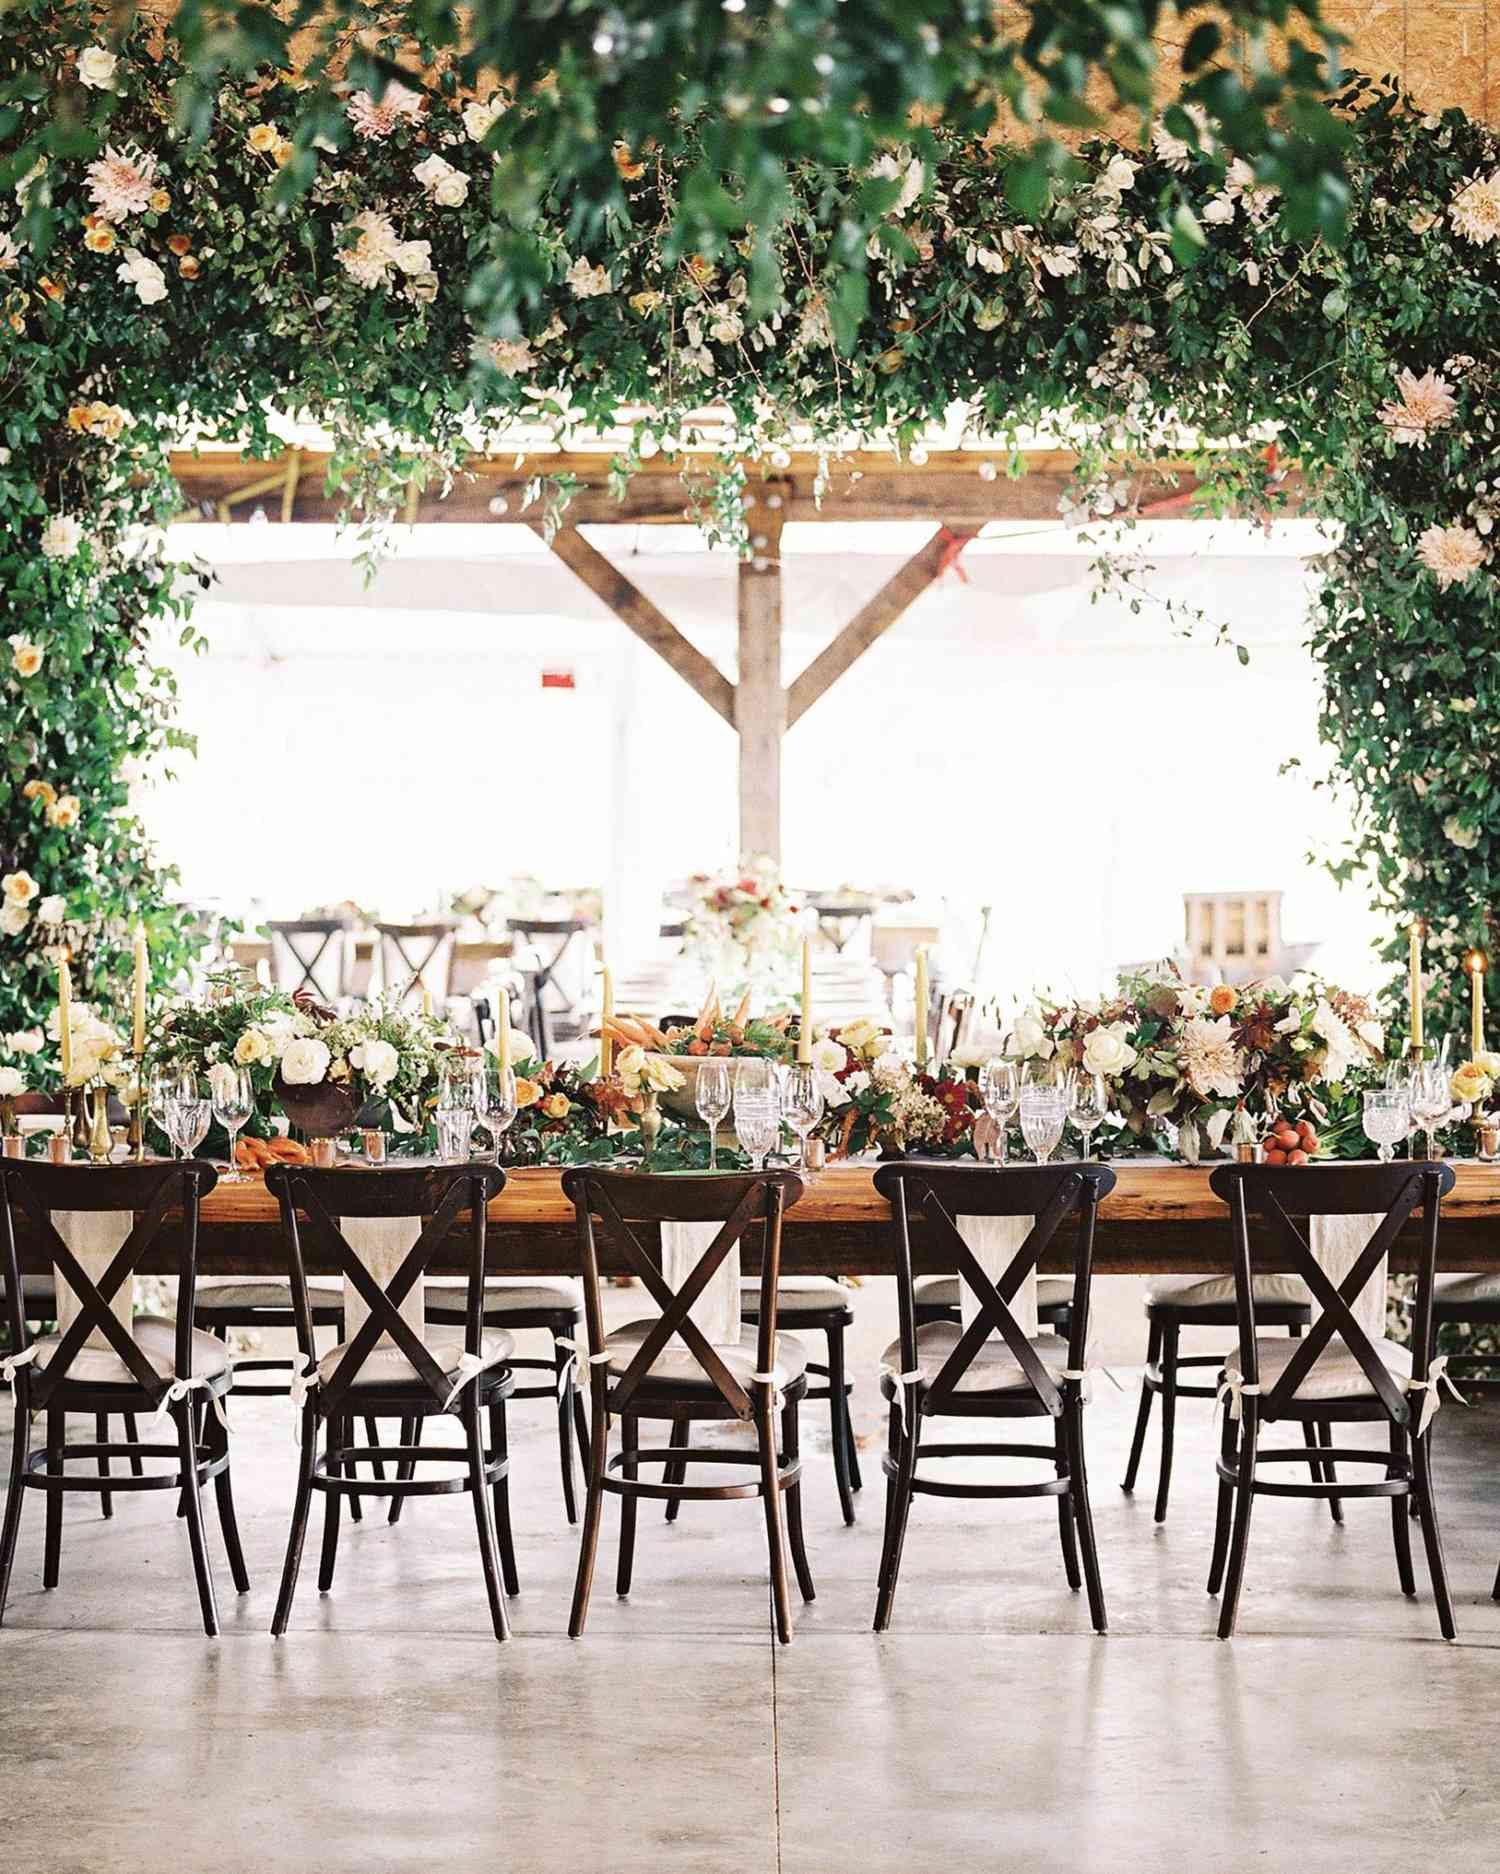 Head Table, How To Arrange Tables For A Wedding Reception